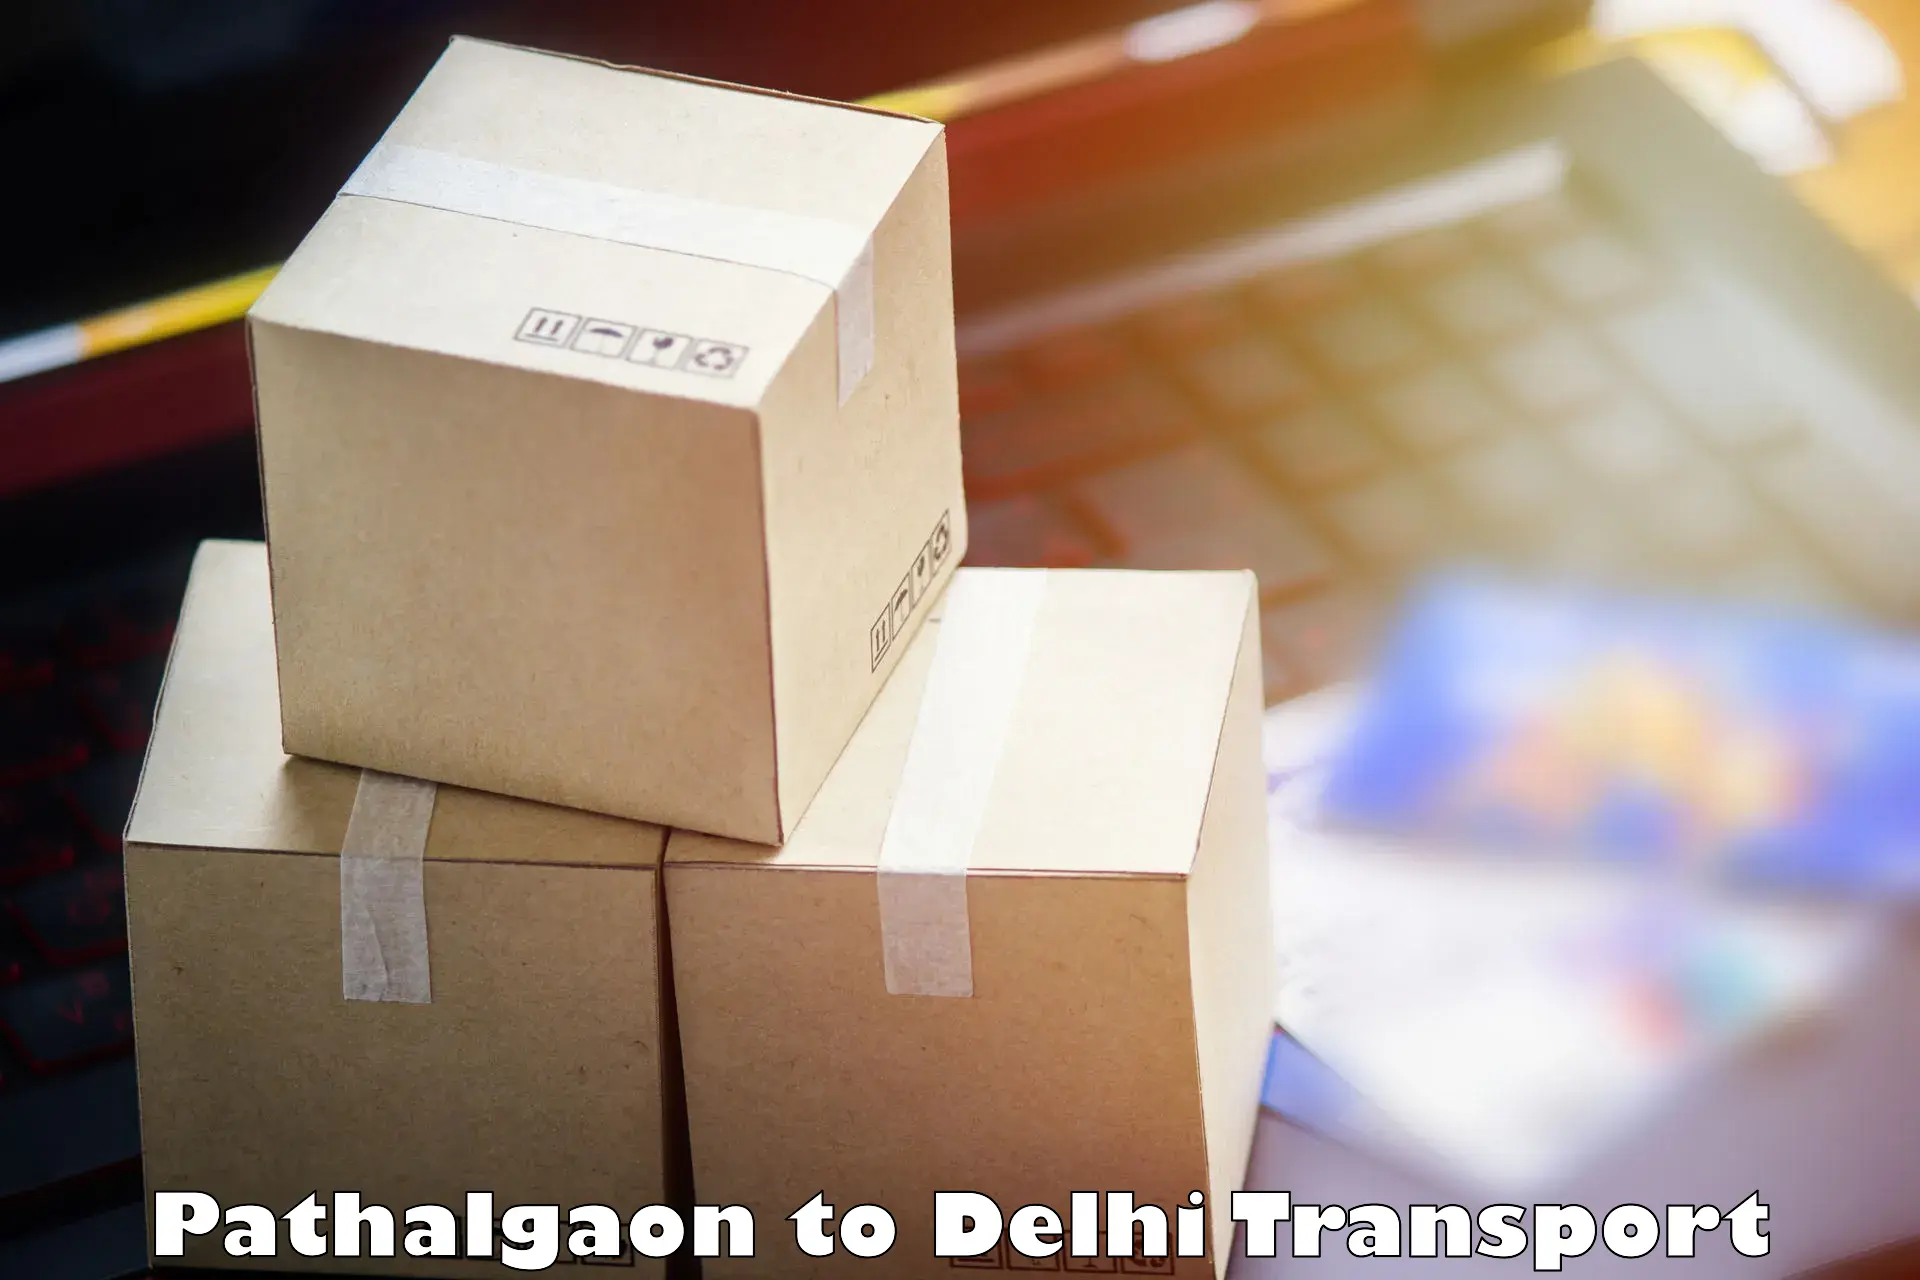 Material transport services Pathalgaon to Delhi